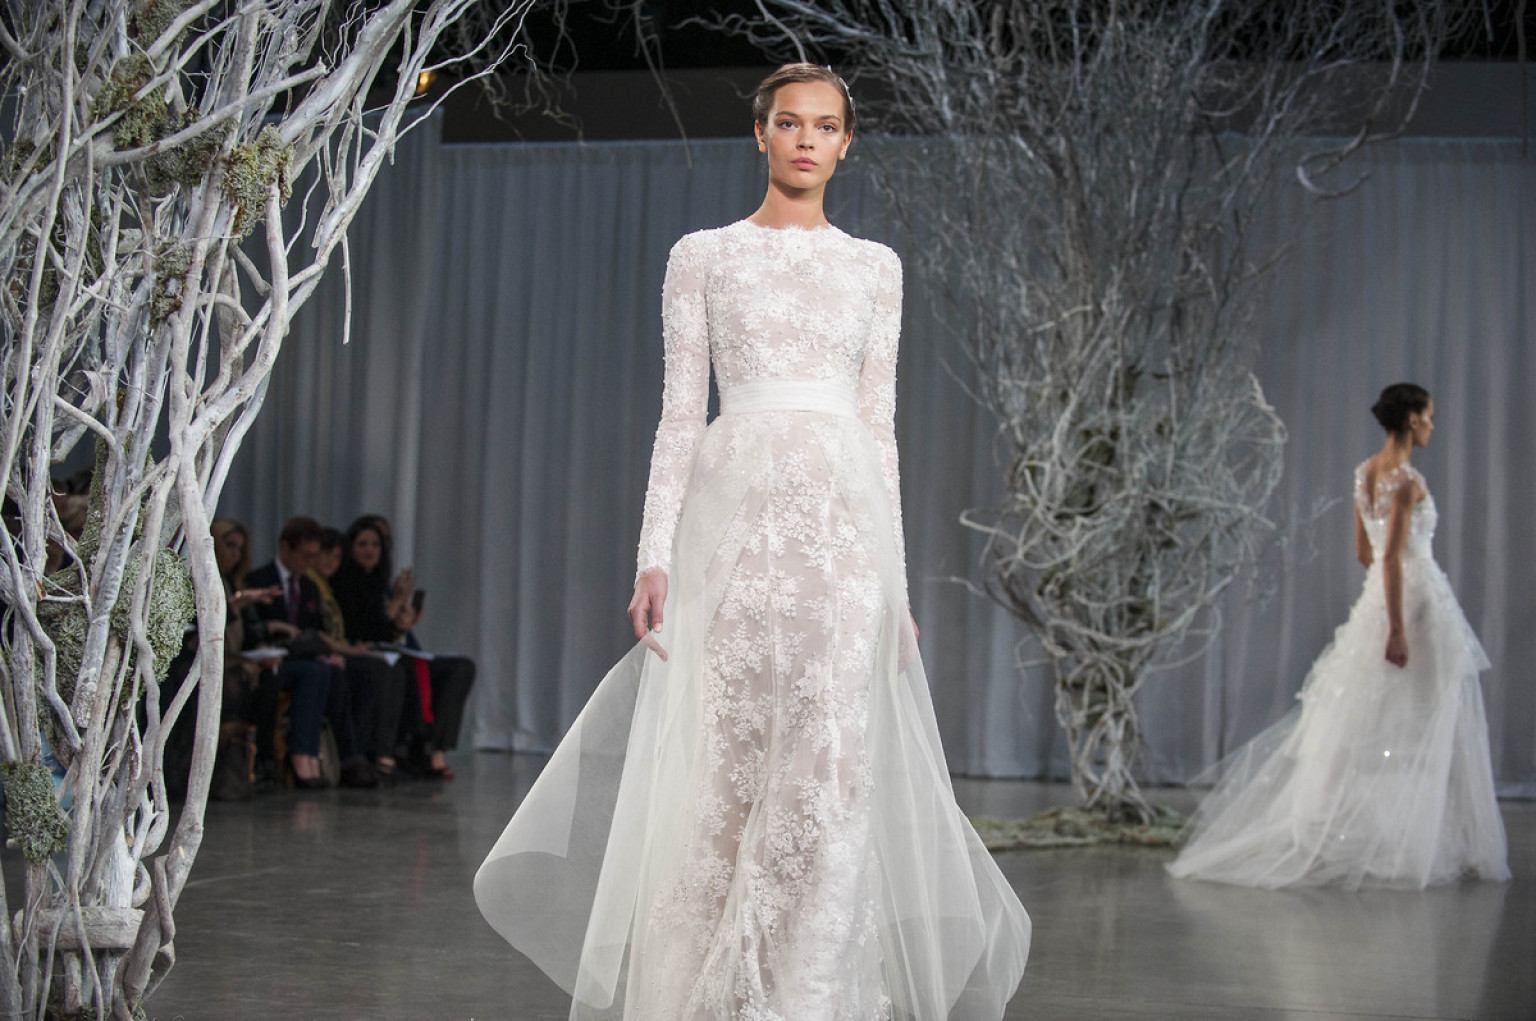 Wedding Dress Trends For 2013 Revealed By Randy Fenoli Of Say Yes To The Dress Video Huffpost